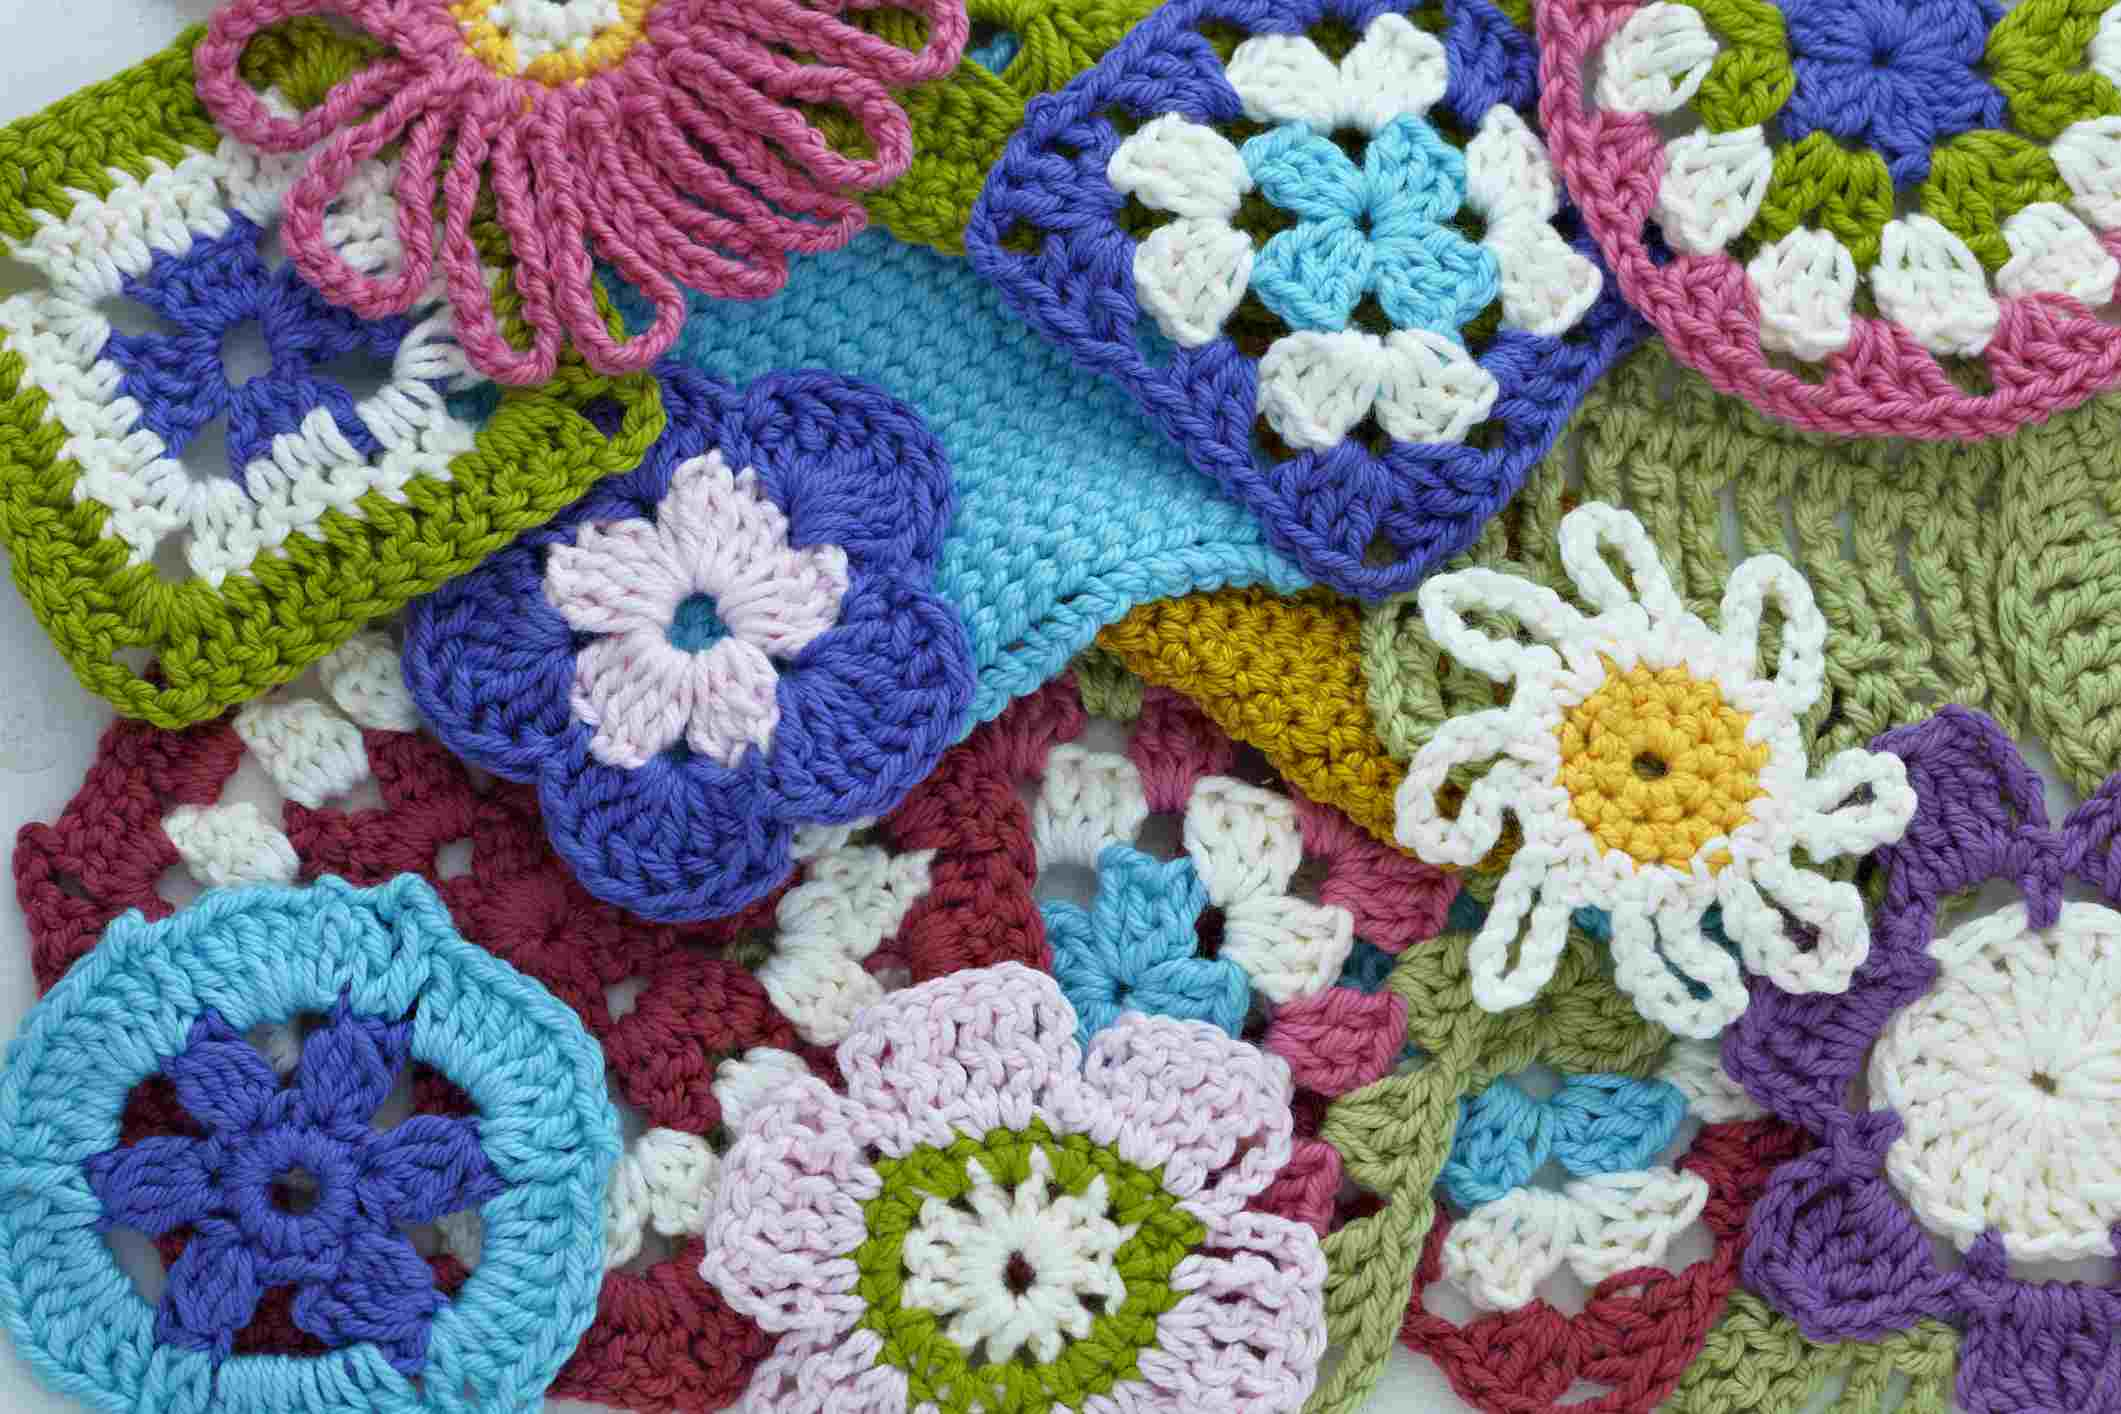 Crochet Squares Patterns 35 Free Crochet Afghan Square Patterns